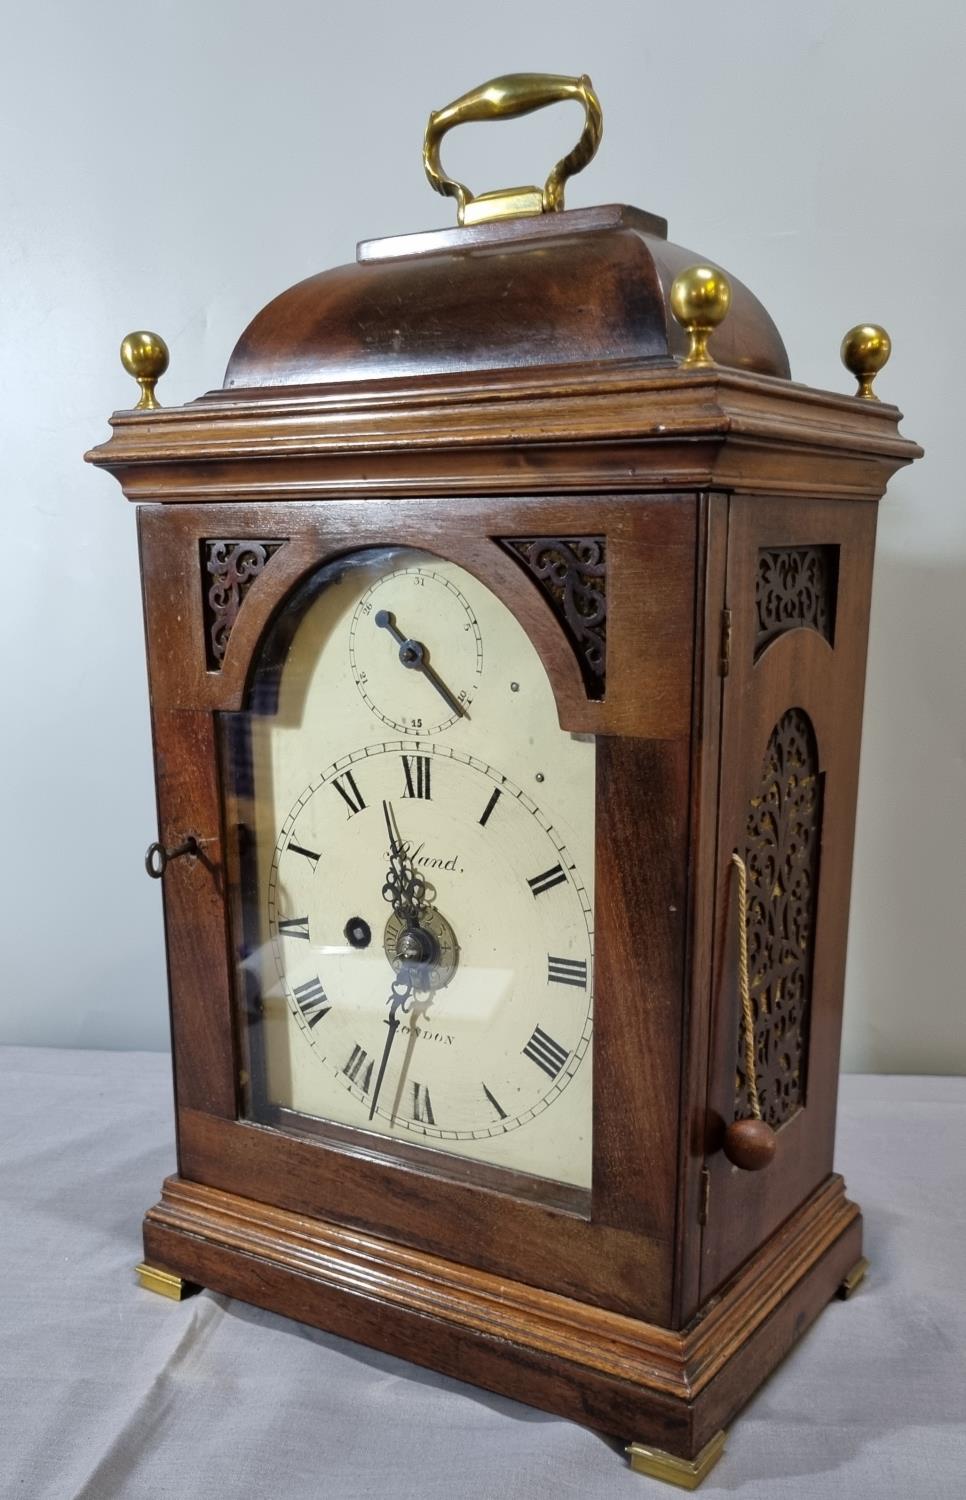 Early 19th century mahogany bracket clock by 'Bland of London', having caddy top with brass